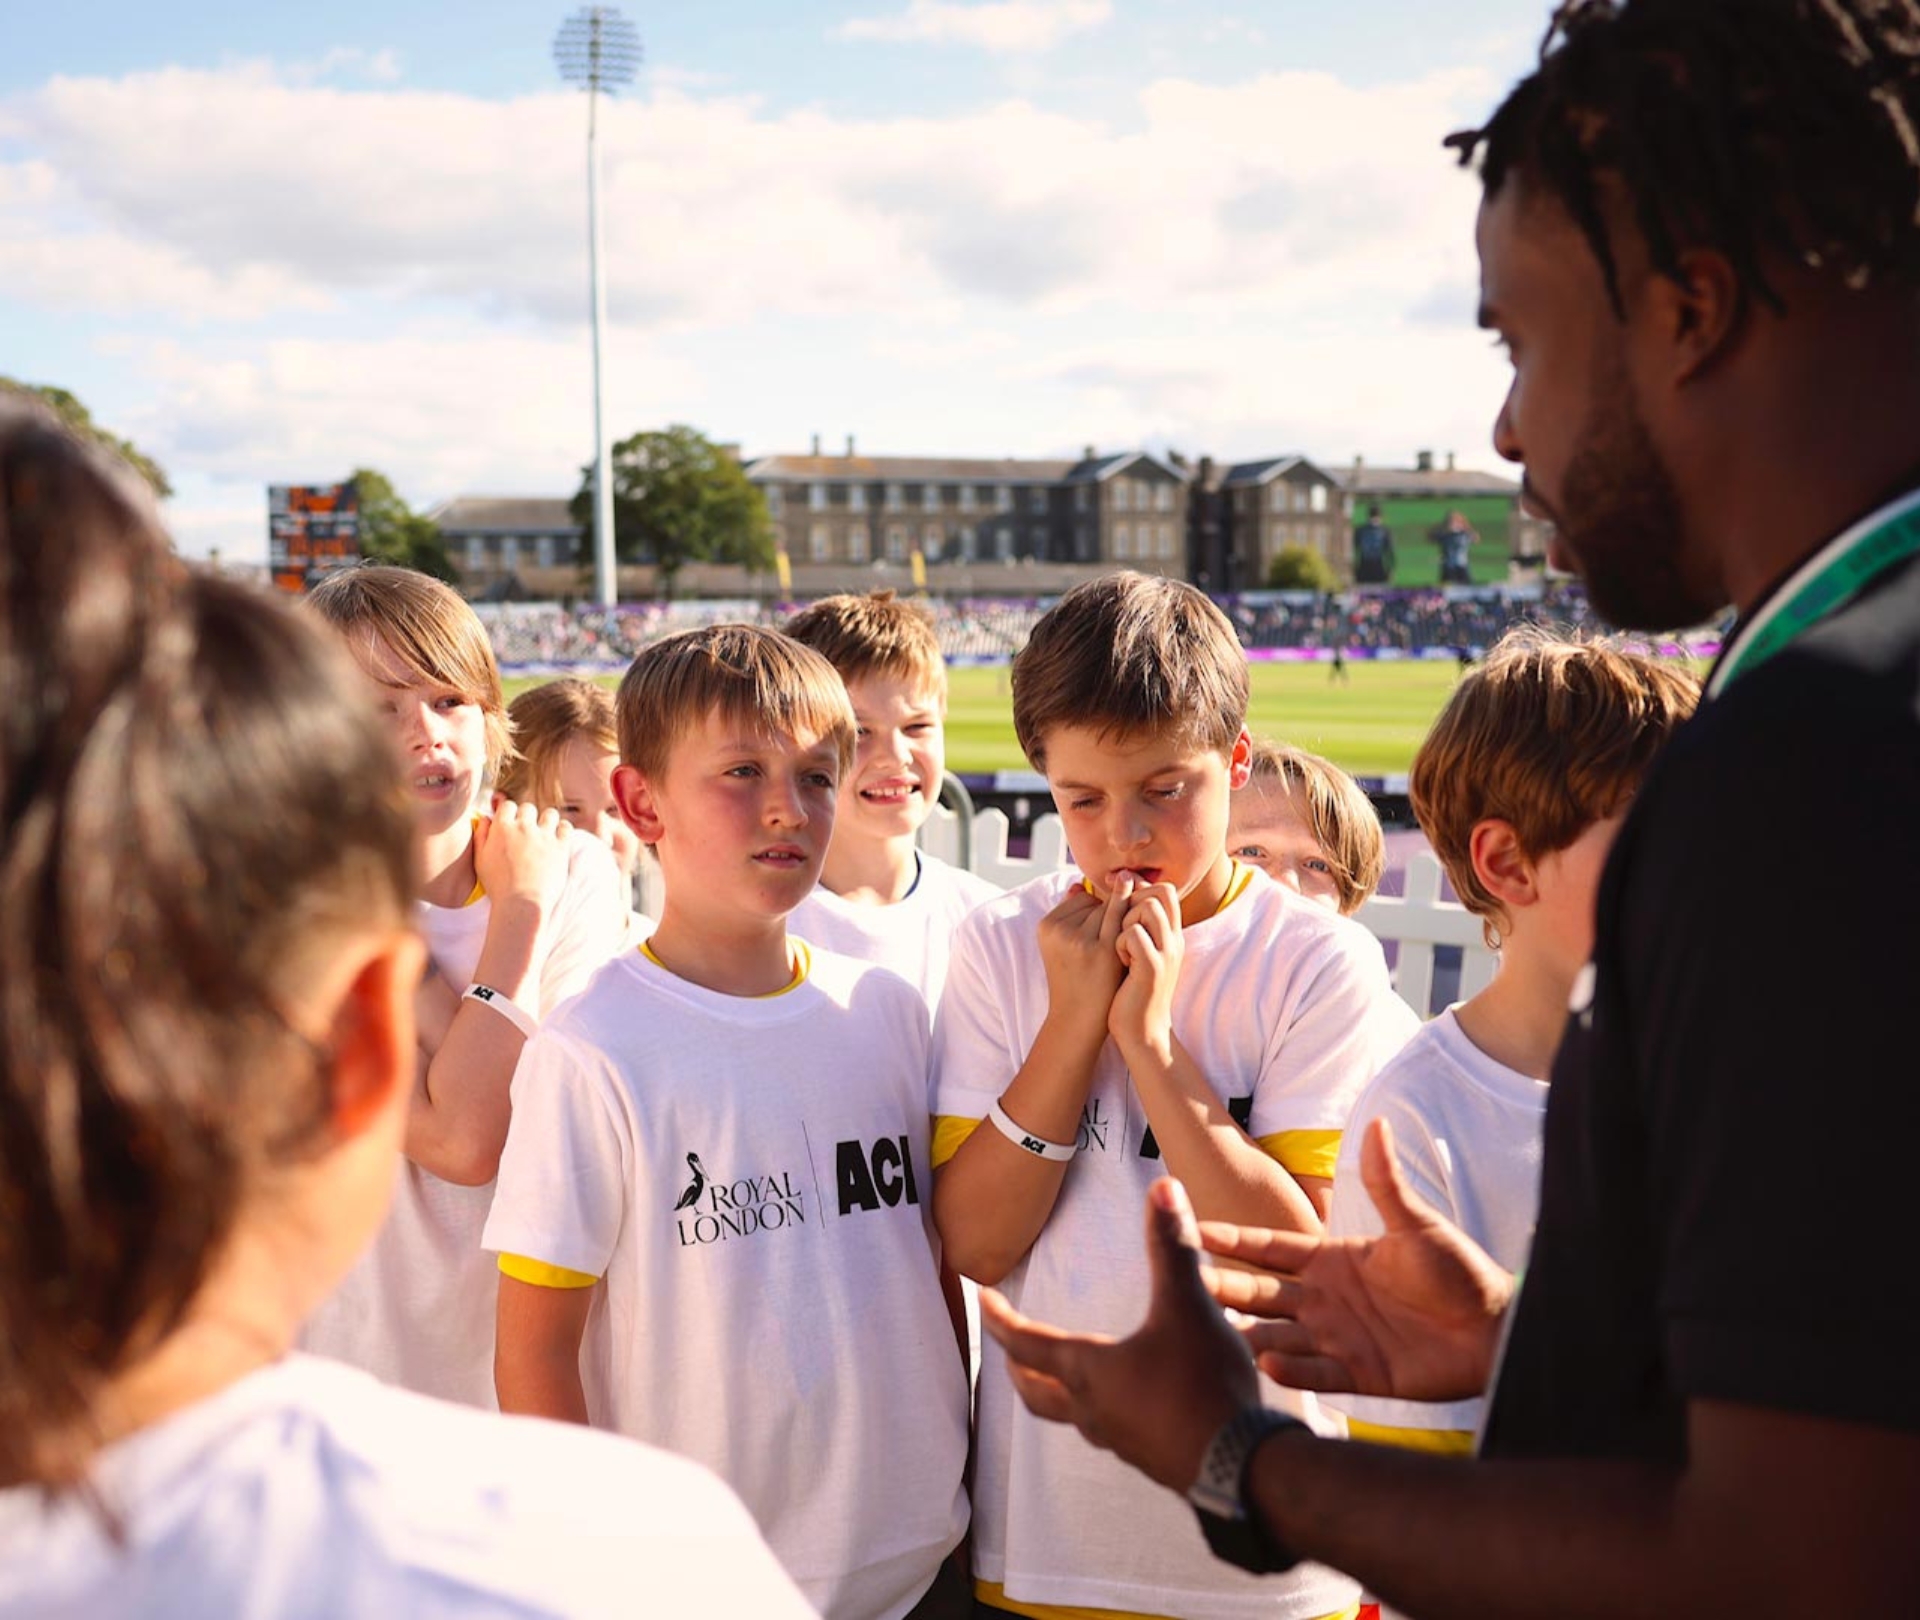 Free cricket sessions for Bristol youngsters!